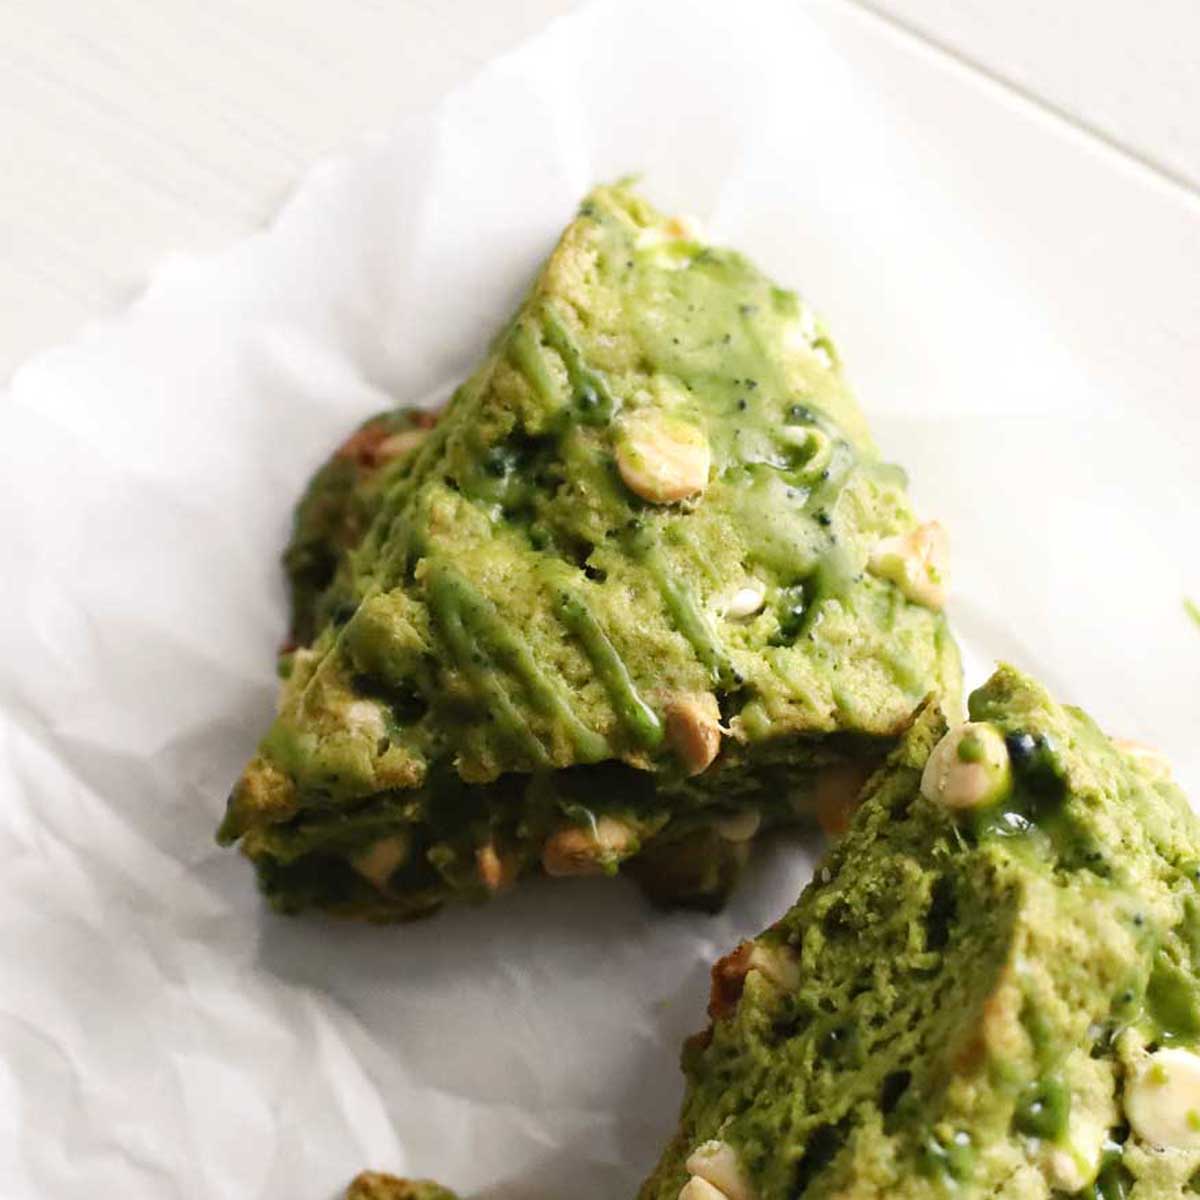 Homemade Matcha Scones with White Chocolate Chips (No Butter Required!) - Matcha Scones